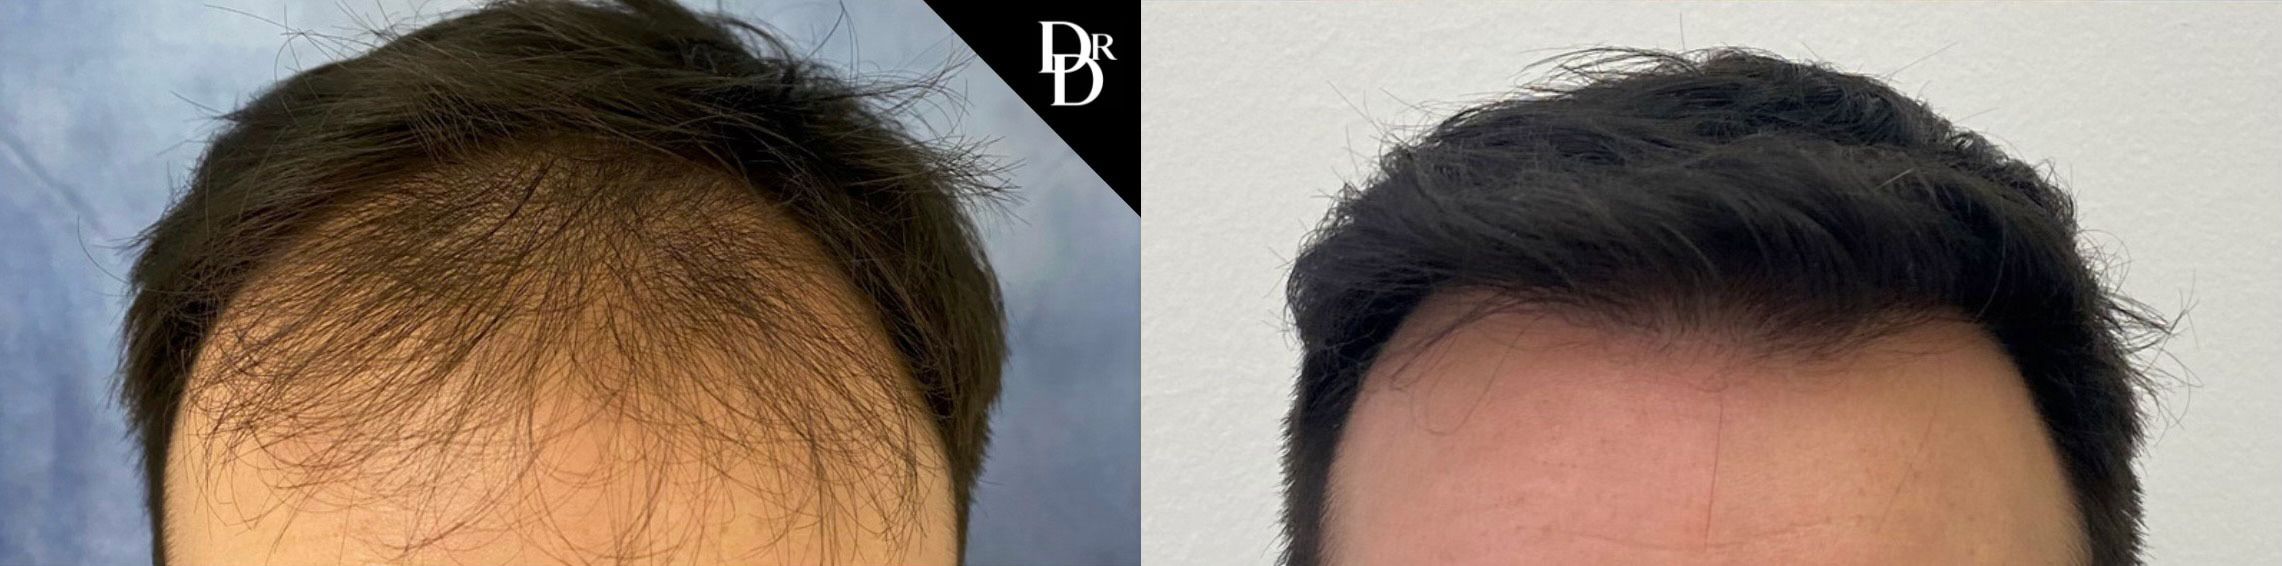 Hair Transplant Before and After Photo by Dr. Demetri in Beverly Hills California